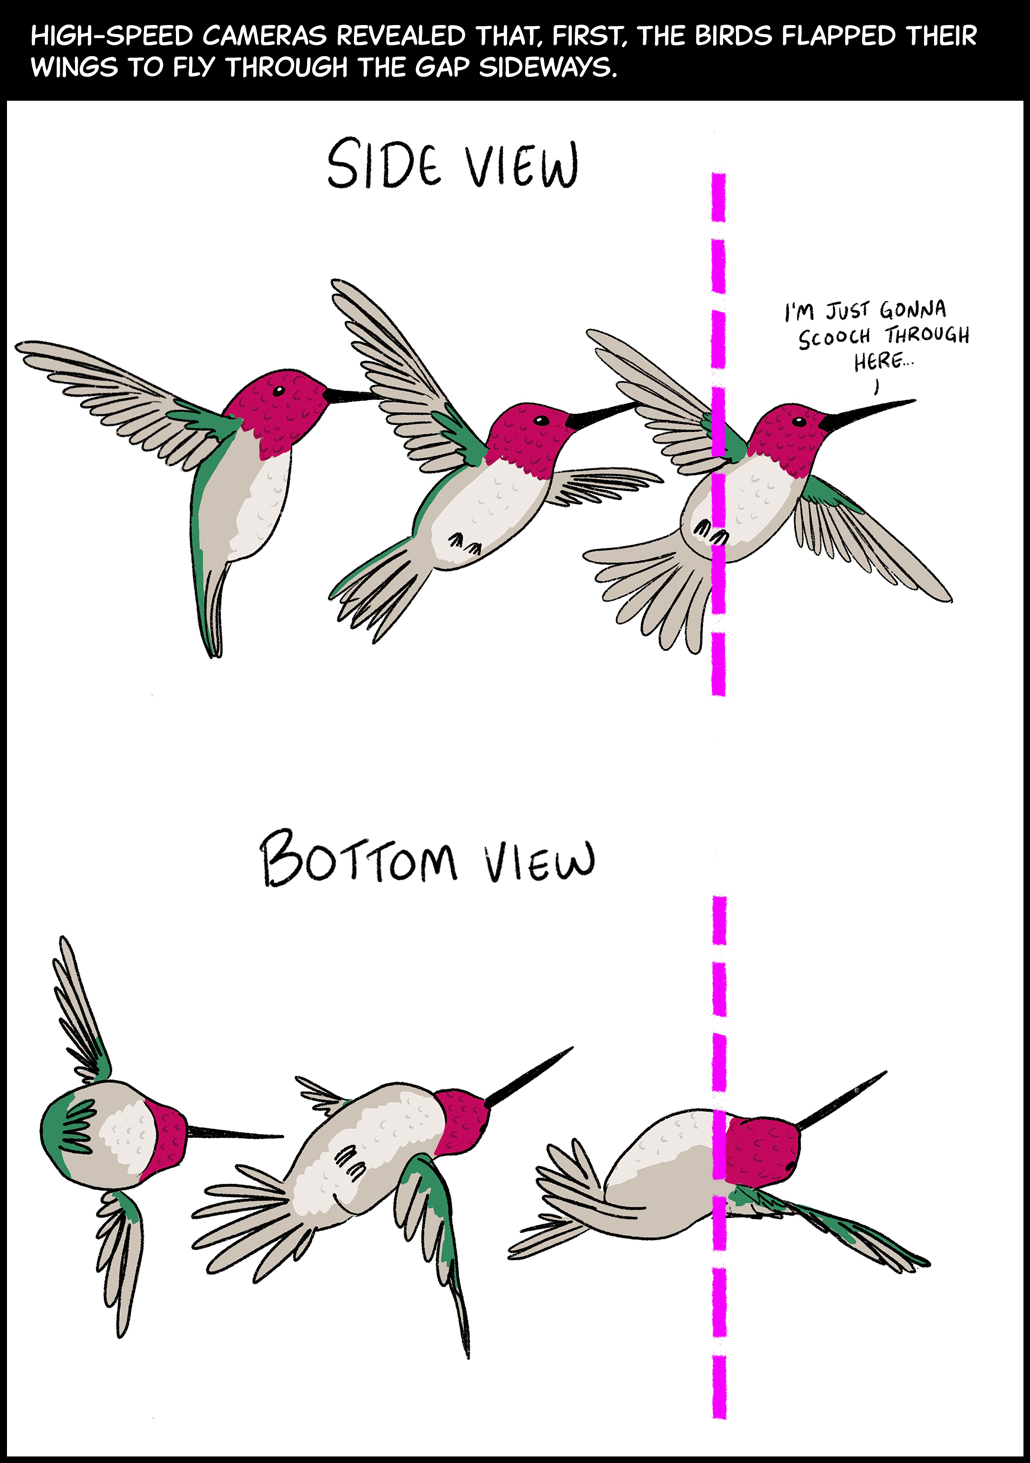 High-speed cameras revealed that, at first, the birds flapped their wings to fly through the gap sideways. Image (top): A side view of a hummingbird shows how it flies sideways through a gap, bringing its left wing forward and its right wing backward. As the hummingbird flies sideways through the gap, it says, “I’m just gonna scooch through here…” Image (bottom): A bottom view of the same hummingbird shows how it brings its left wing forward and right wing backward to scooch through the gap. 